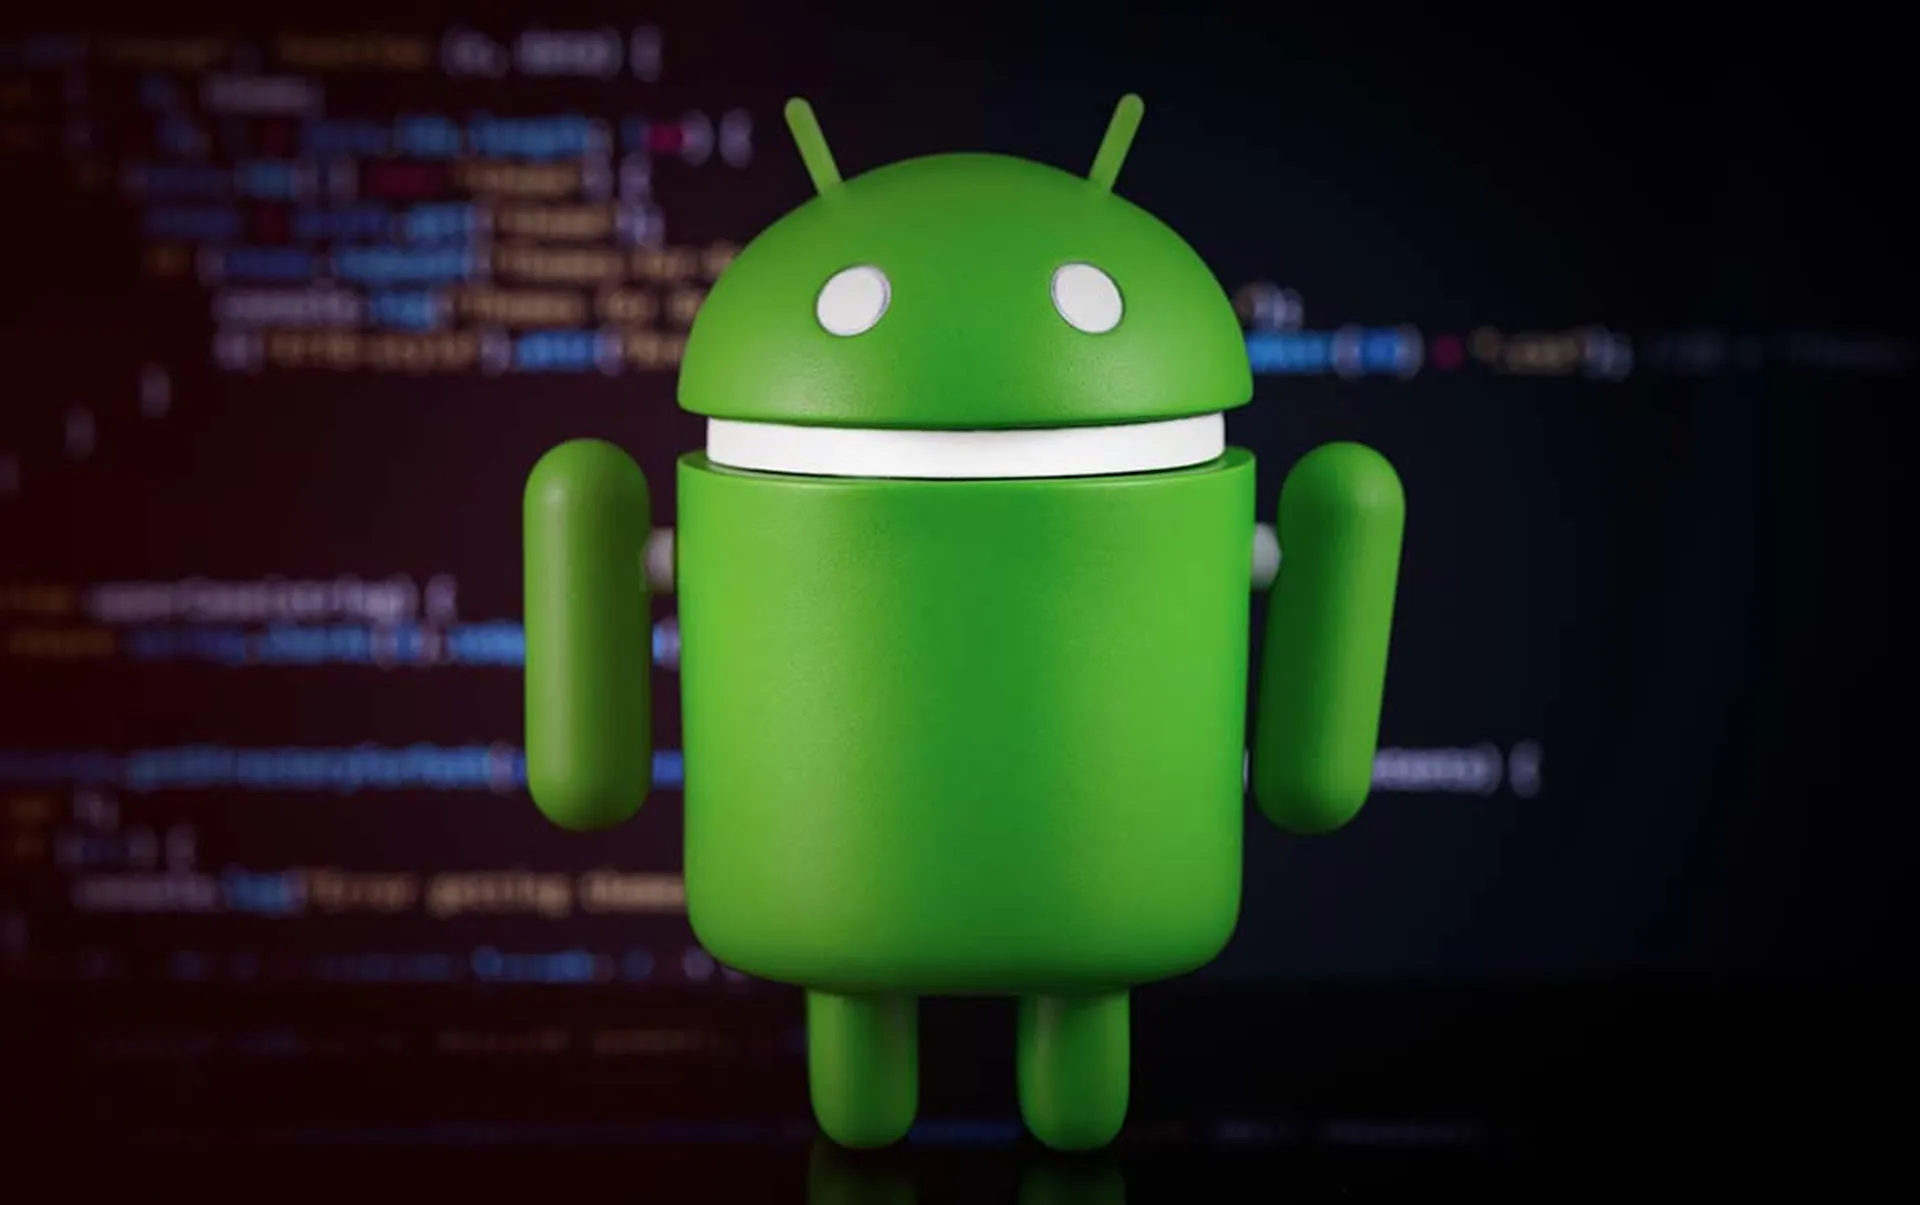 A green Google Android figure on digital blur background.